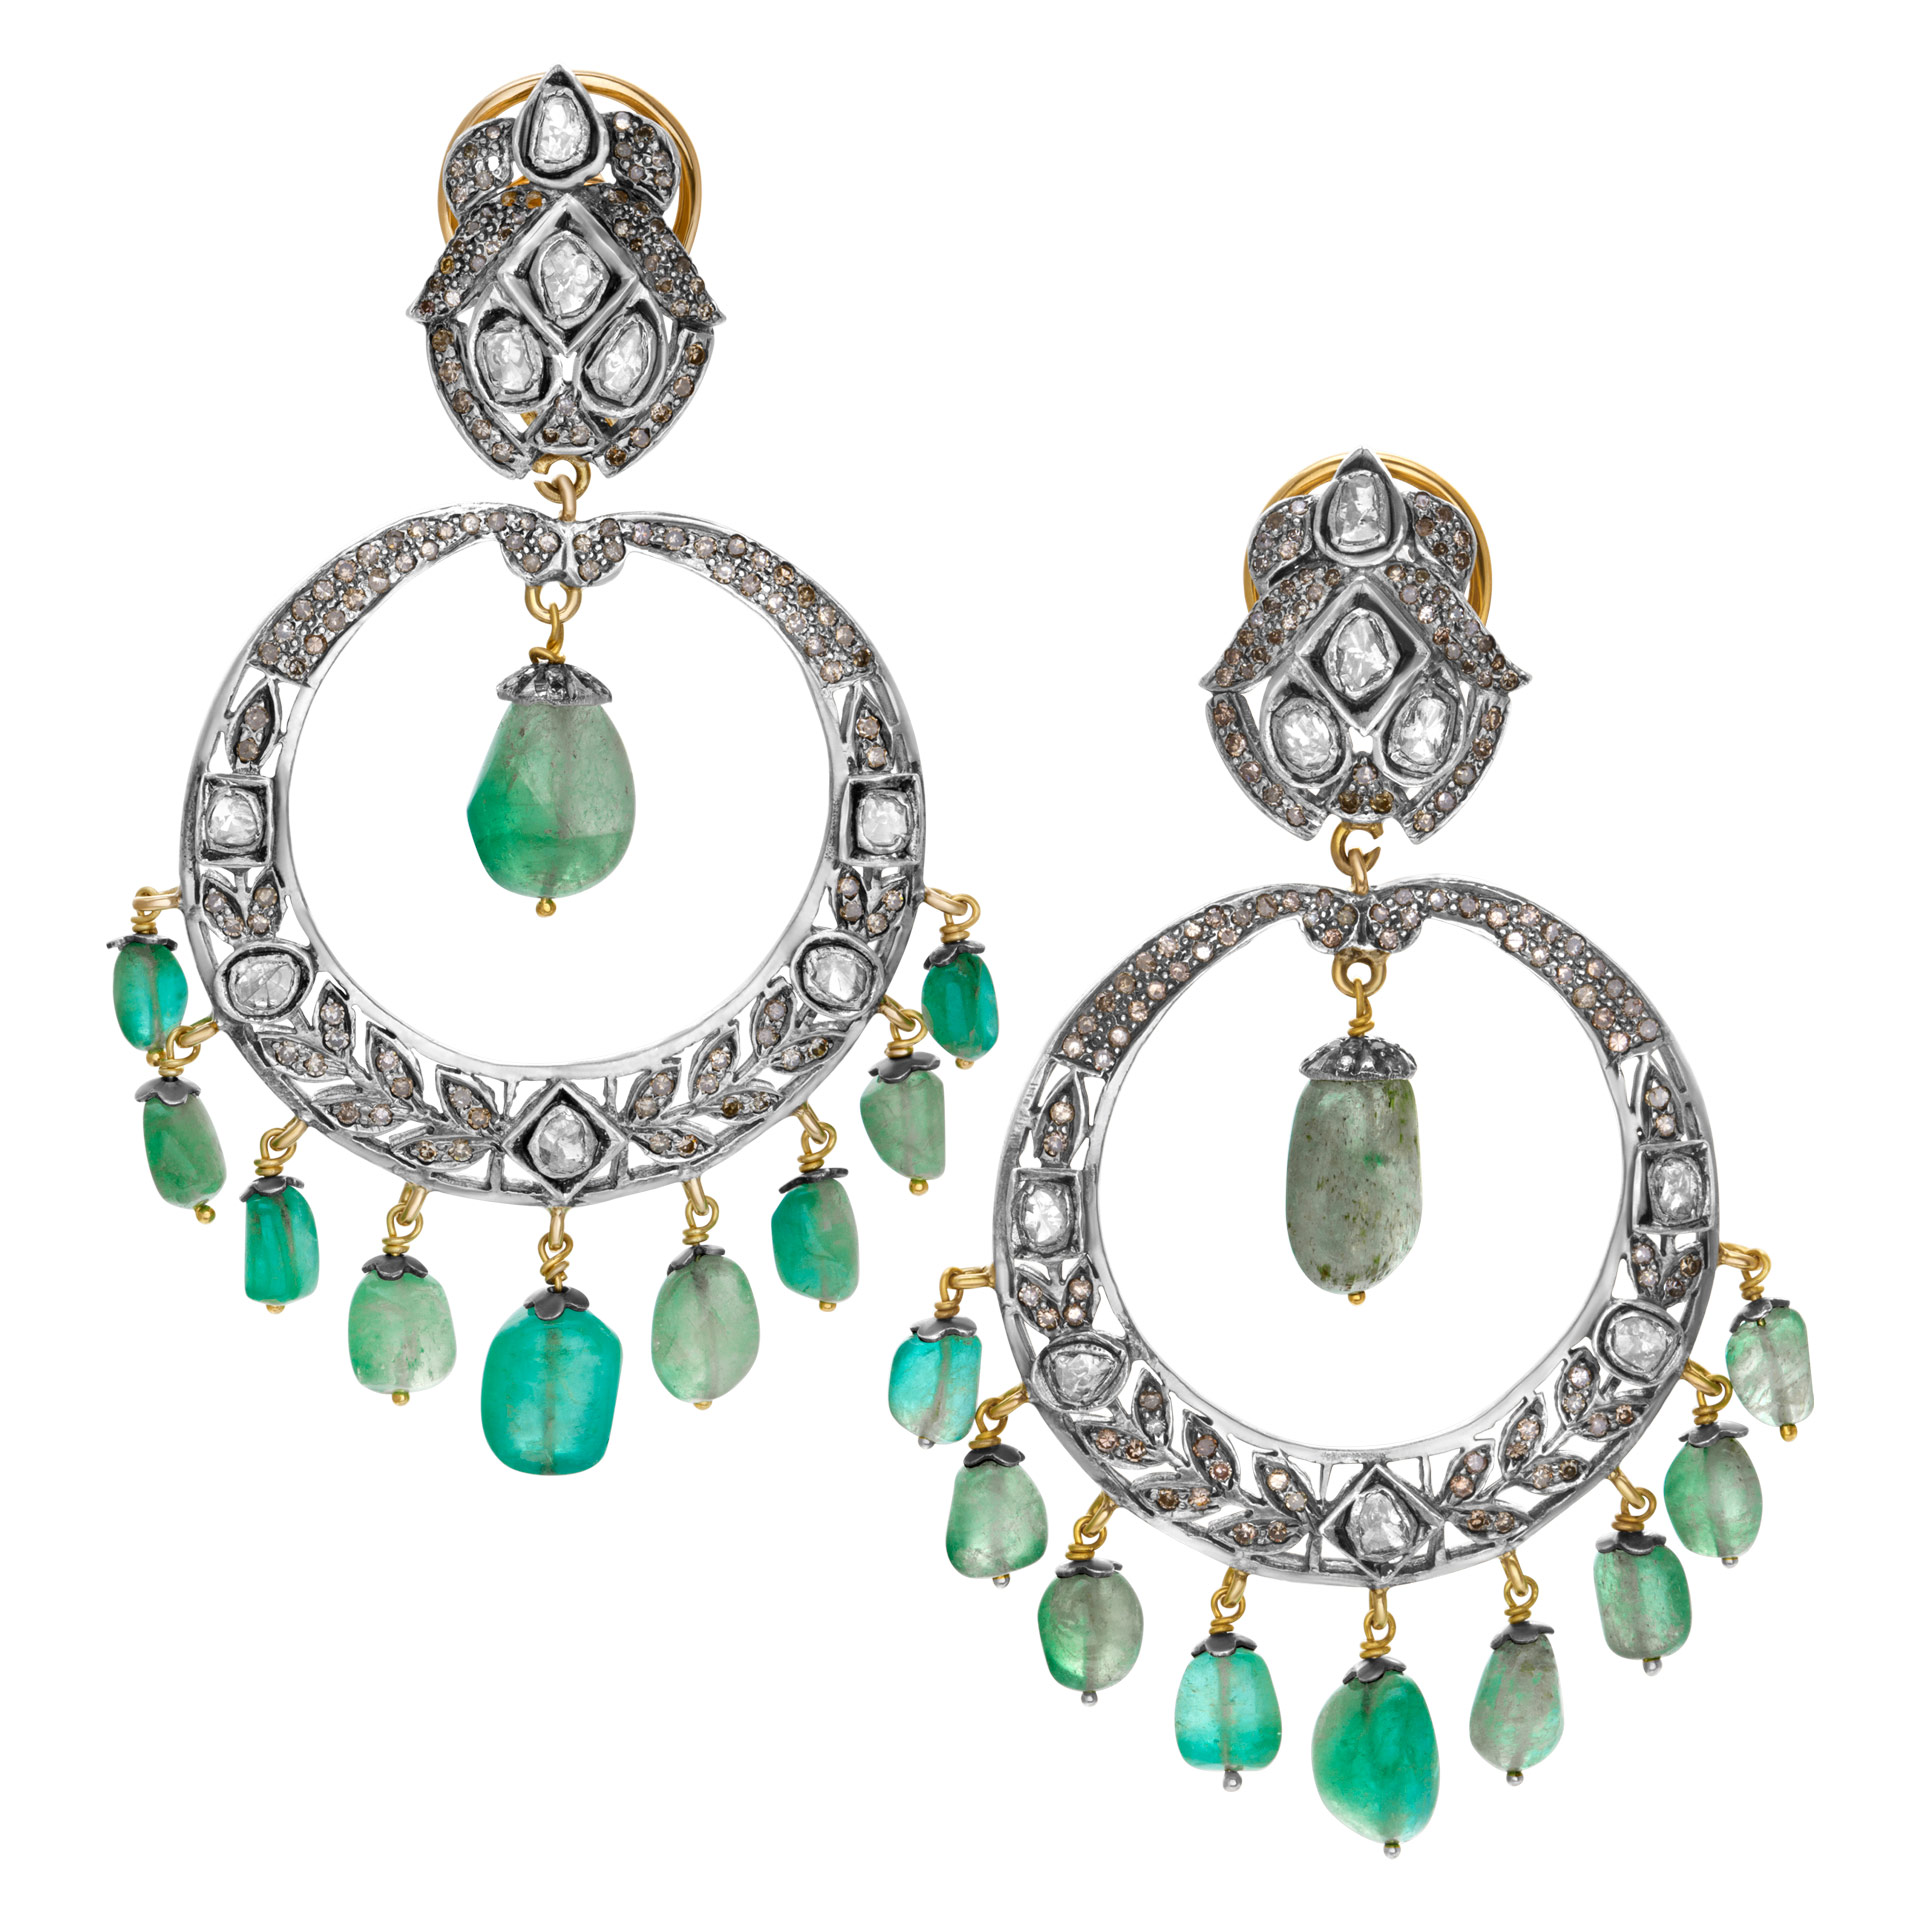 Boho style "Chandelier" earrings with light green emerald beads and over 5 carats rose cut diamonds, image 1